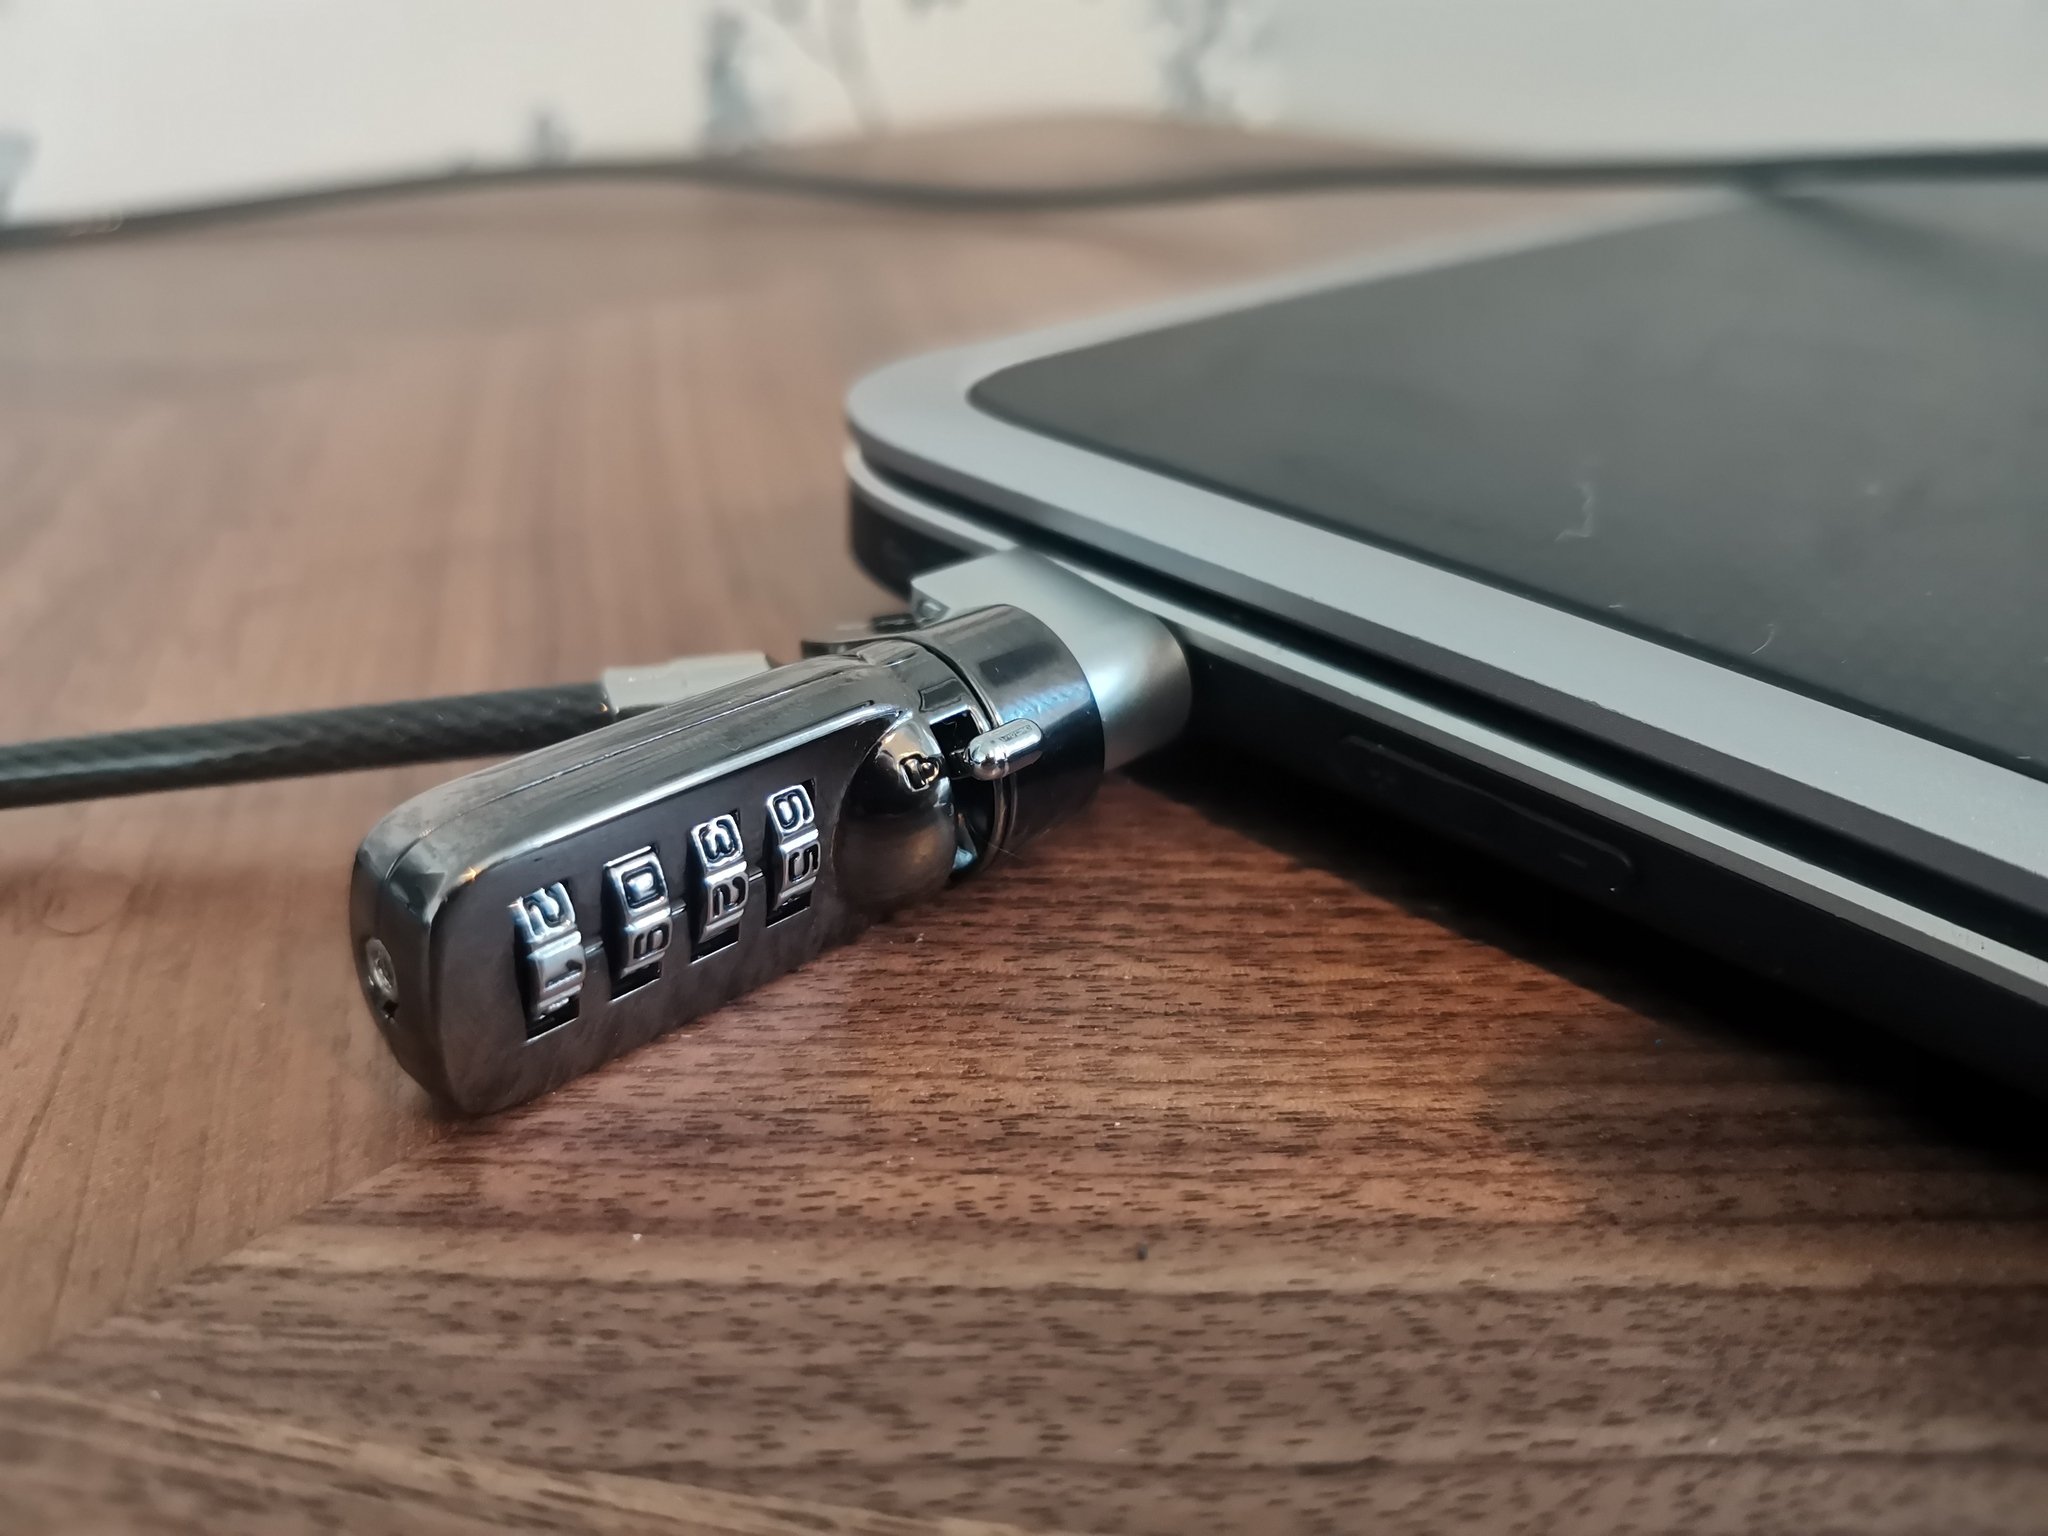 Anchor Adapter In Headphone Jack